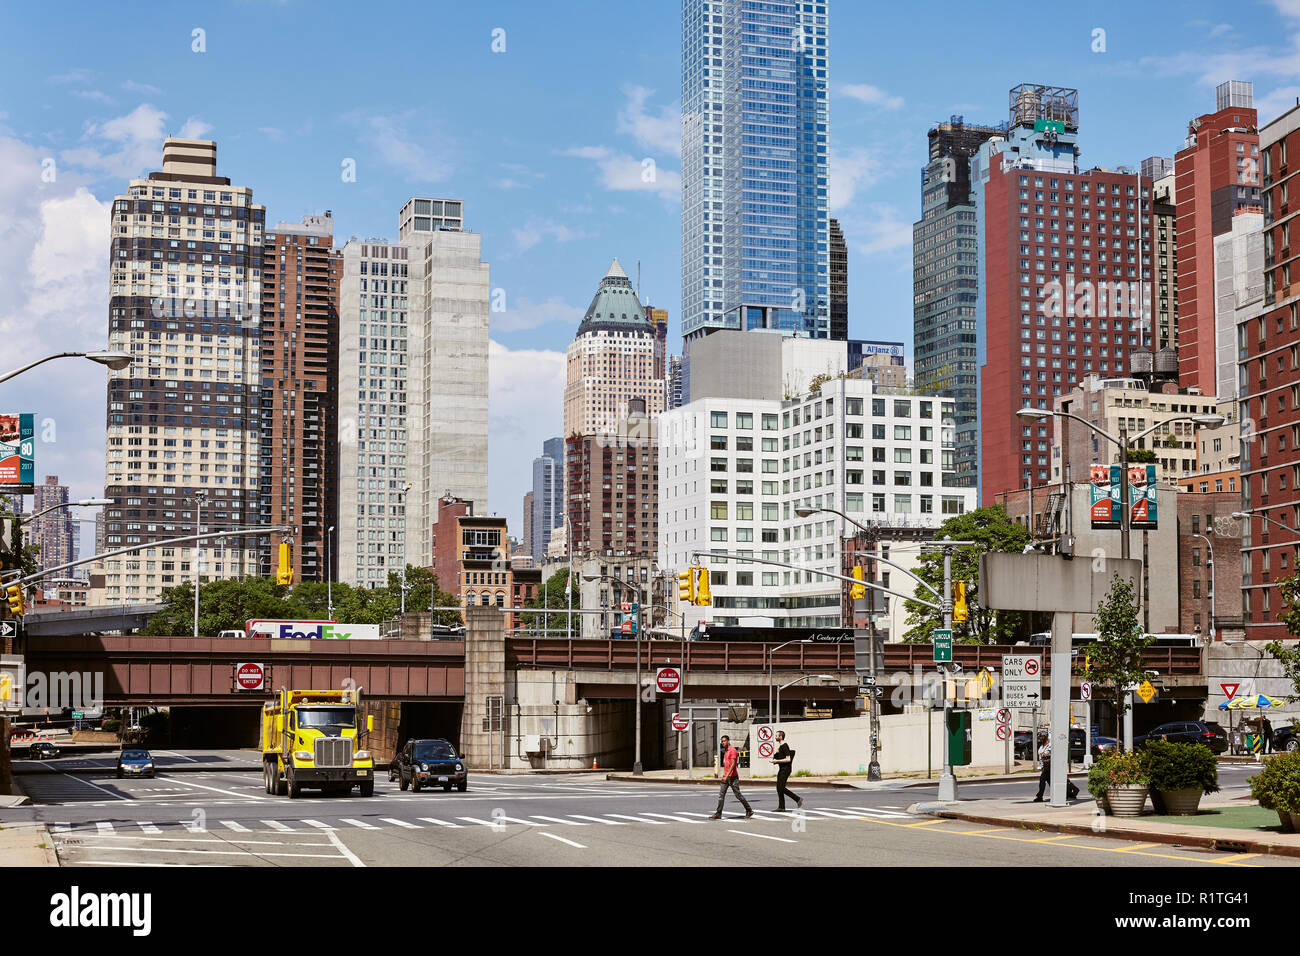 New York, USA - June 28, 2018: City life in the 'Big Apple', this nickname for New York City first introduced in the 1920s by John J. Fitz Gerald. Stock Photo